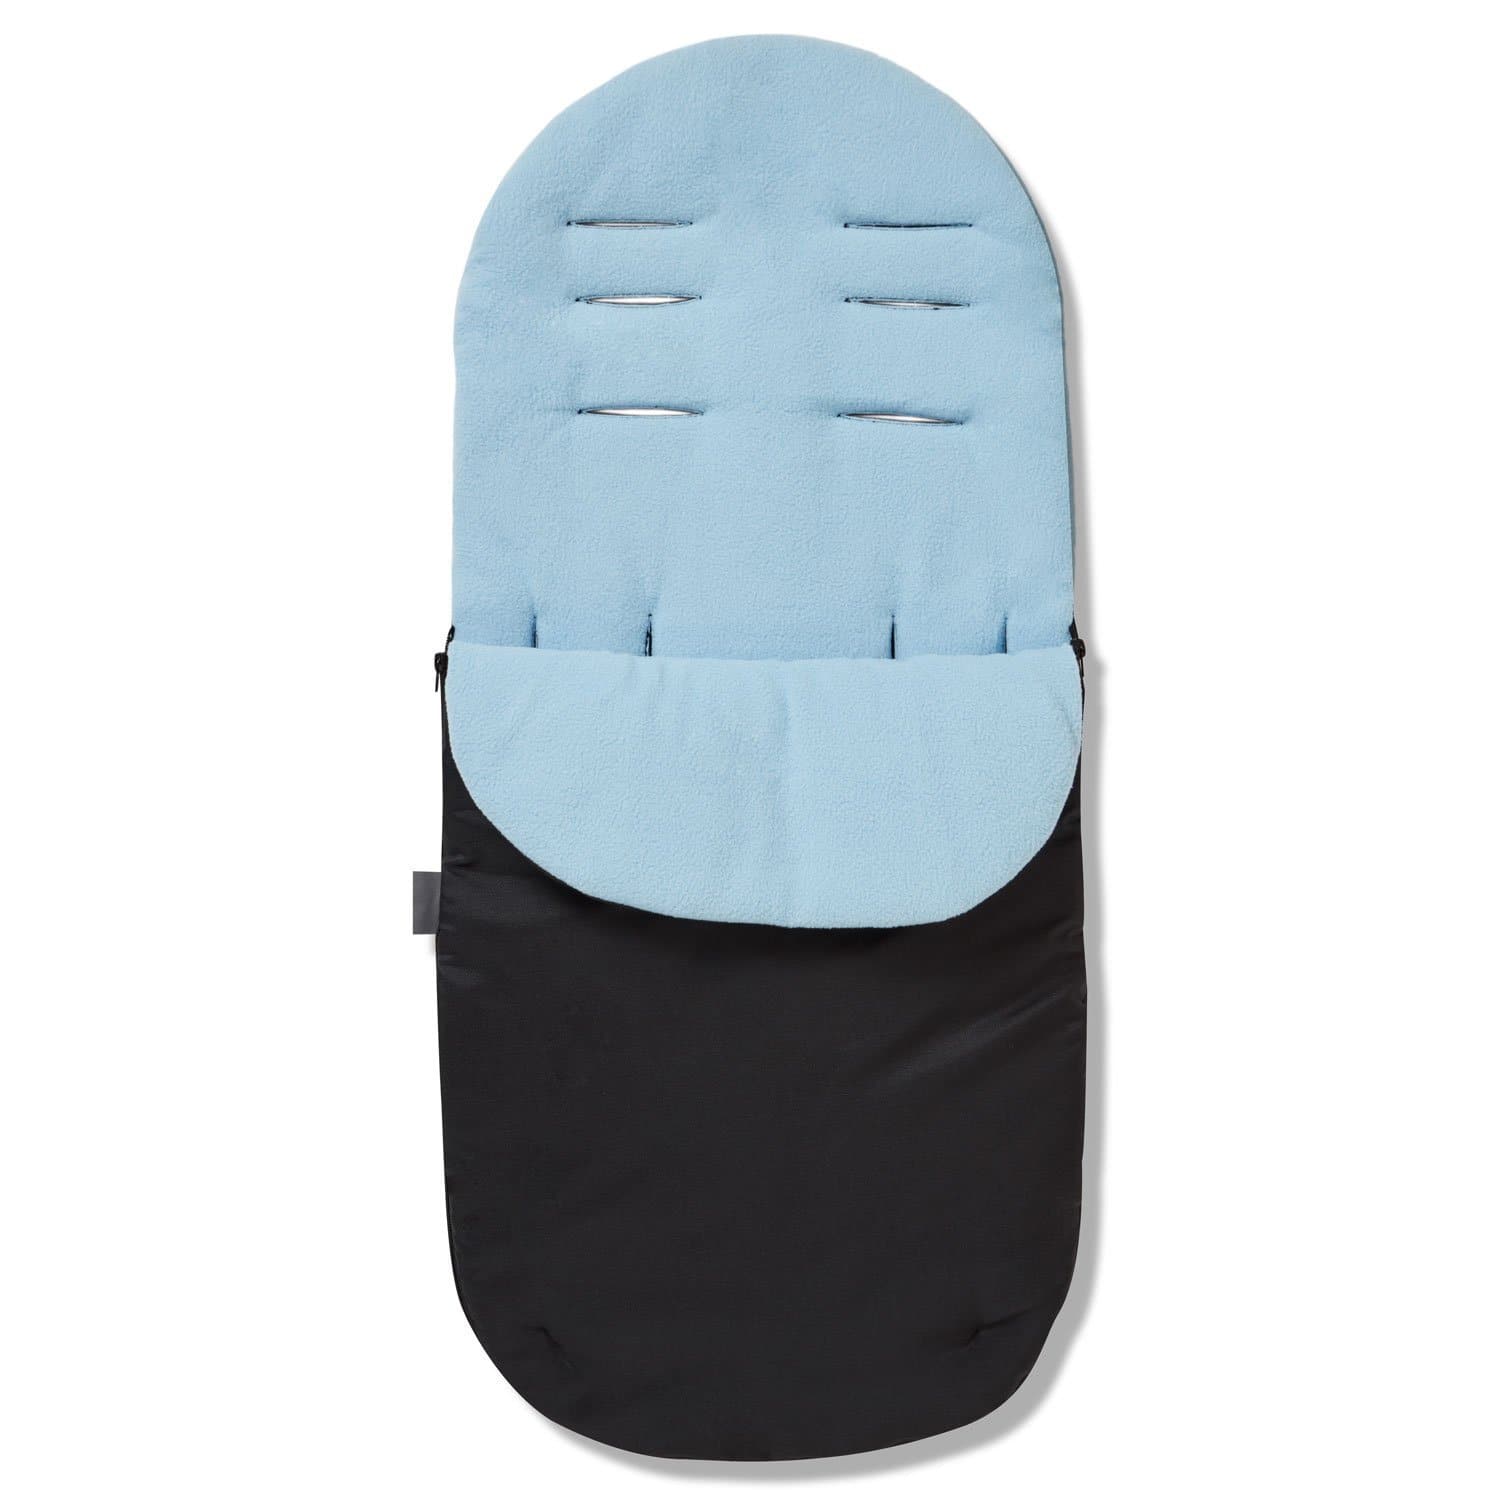 Footmuff / Cosy Toes Compatible with Brevi - Light Blue / Fits All Models | For Your Little One